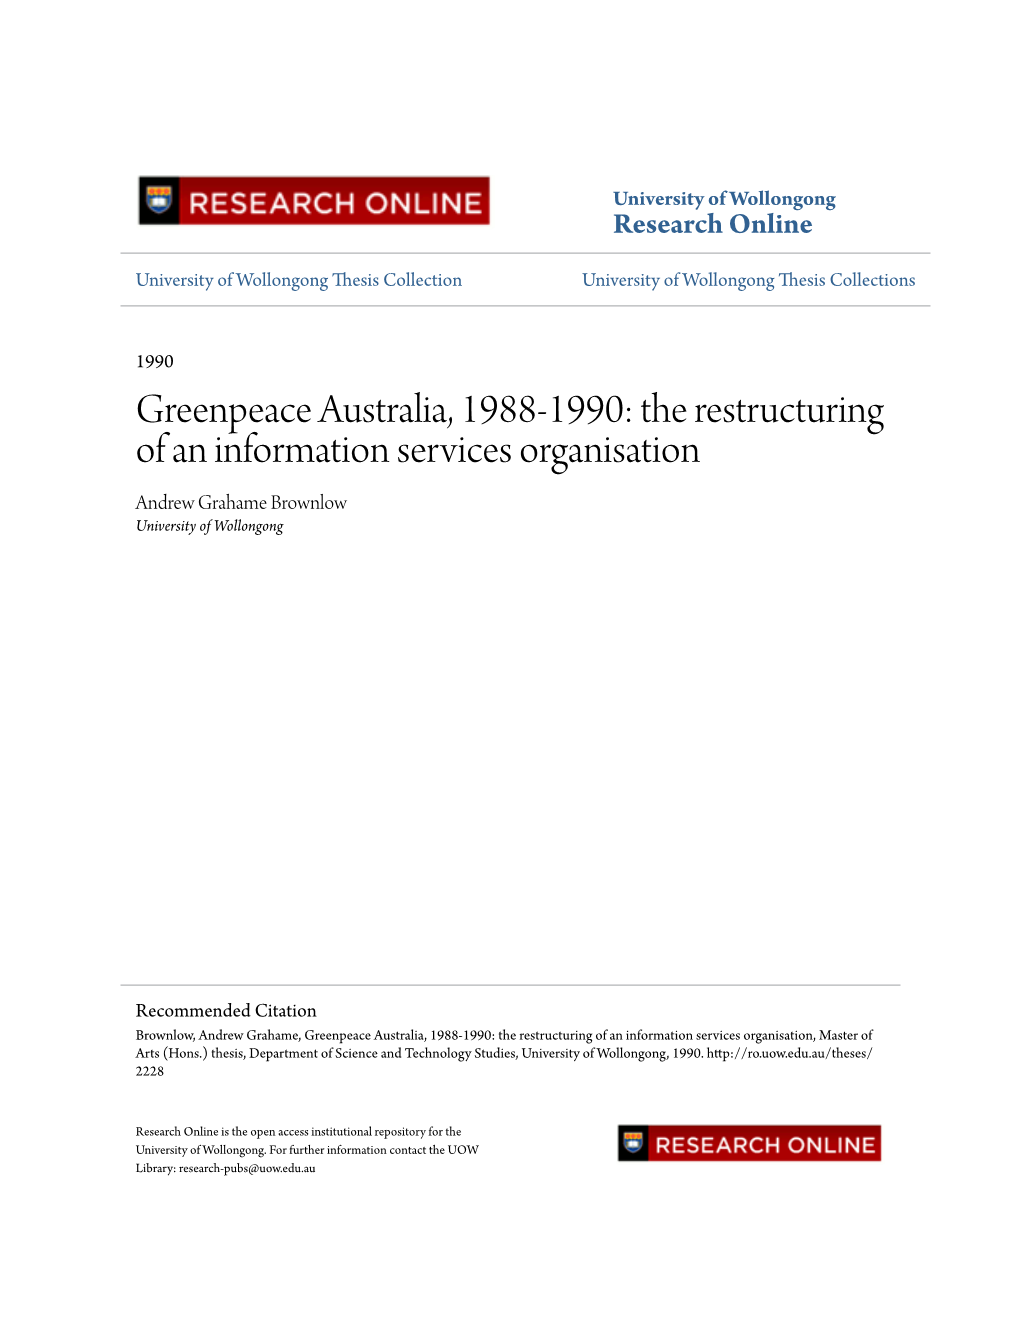 Greenpeace Australia, 1988-1990: the Restructuring of an Information Services Organisation Andrew Grahame Brownlow University of Wollongong